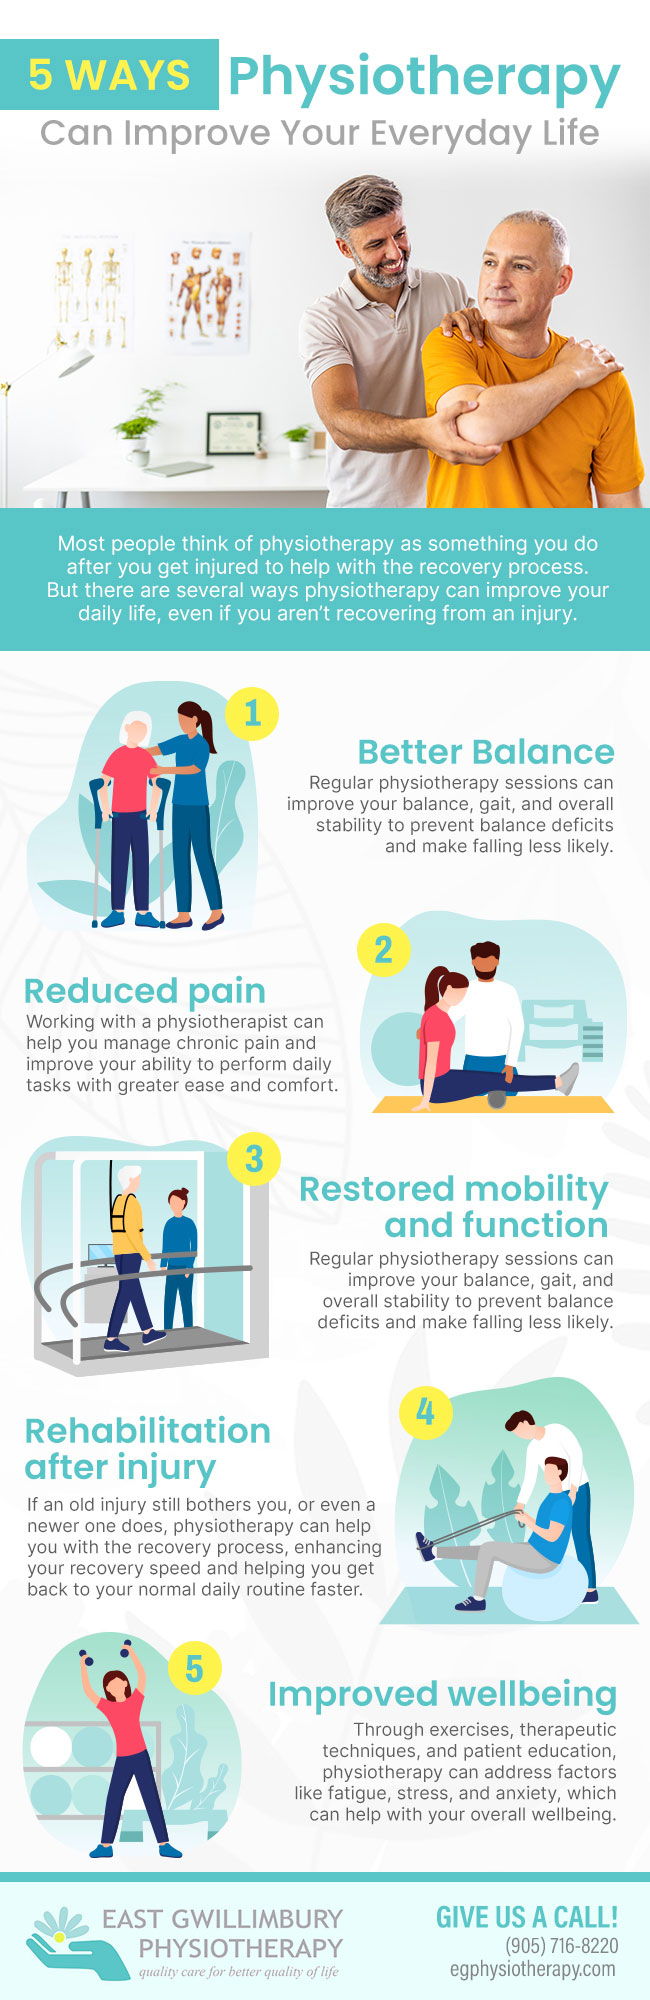 5 Ways Physiotherapy Can Improve Your Everyday Life 